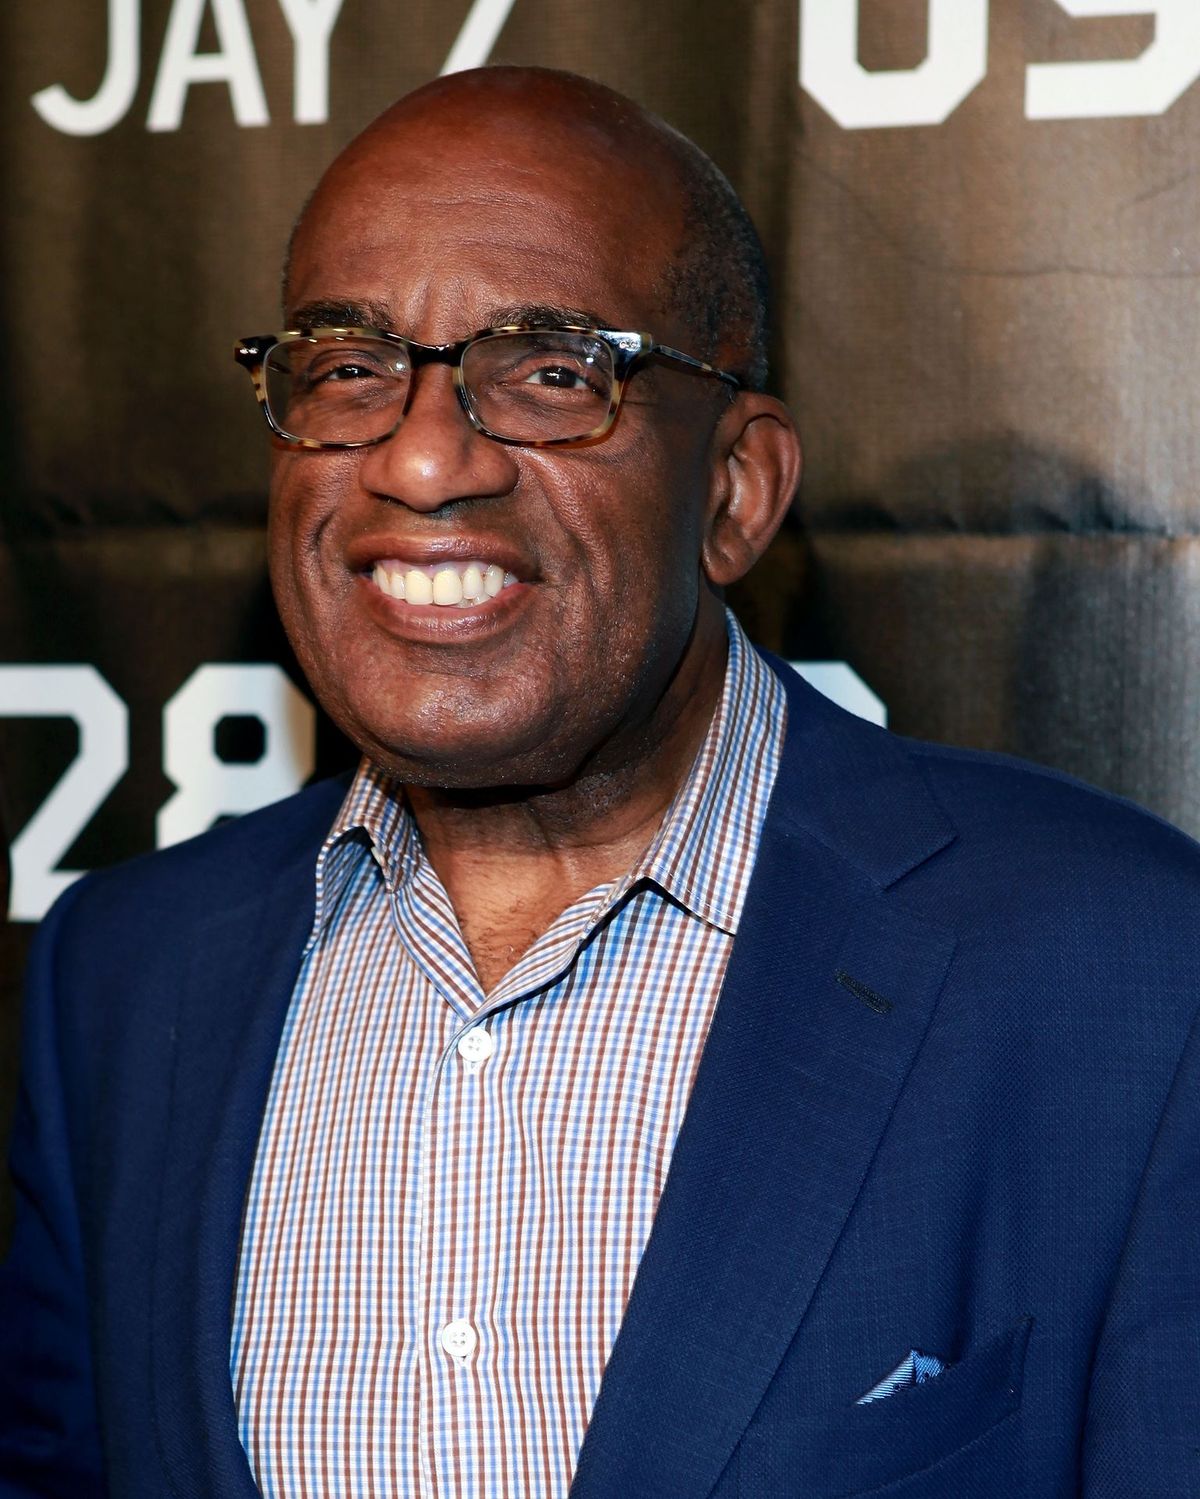 Al Roker in Brooklyn, New York attending a Jay Z concert on September 28, 2012. | Photo: Getty Images.